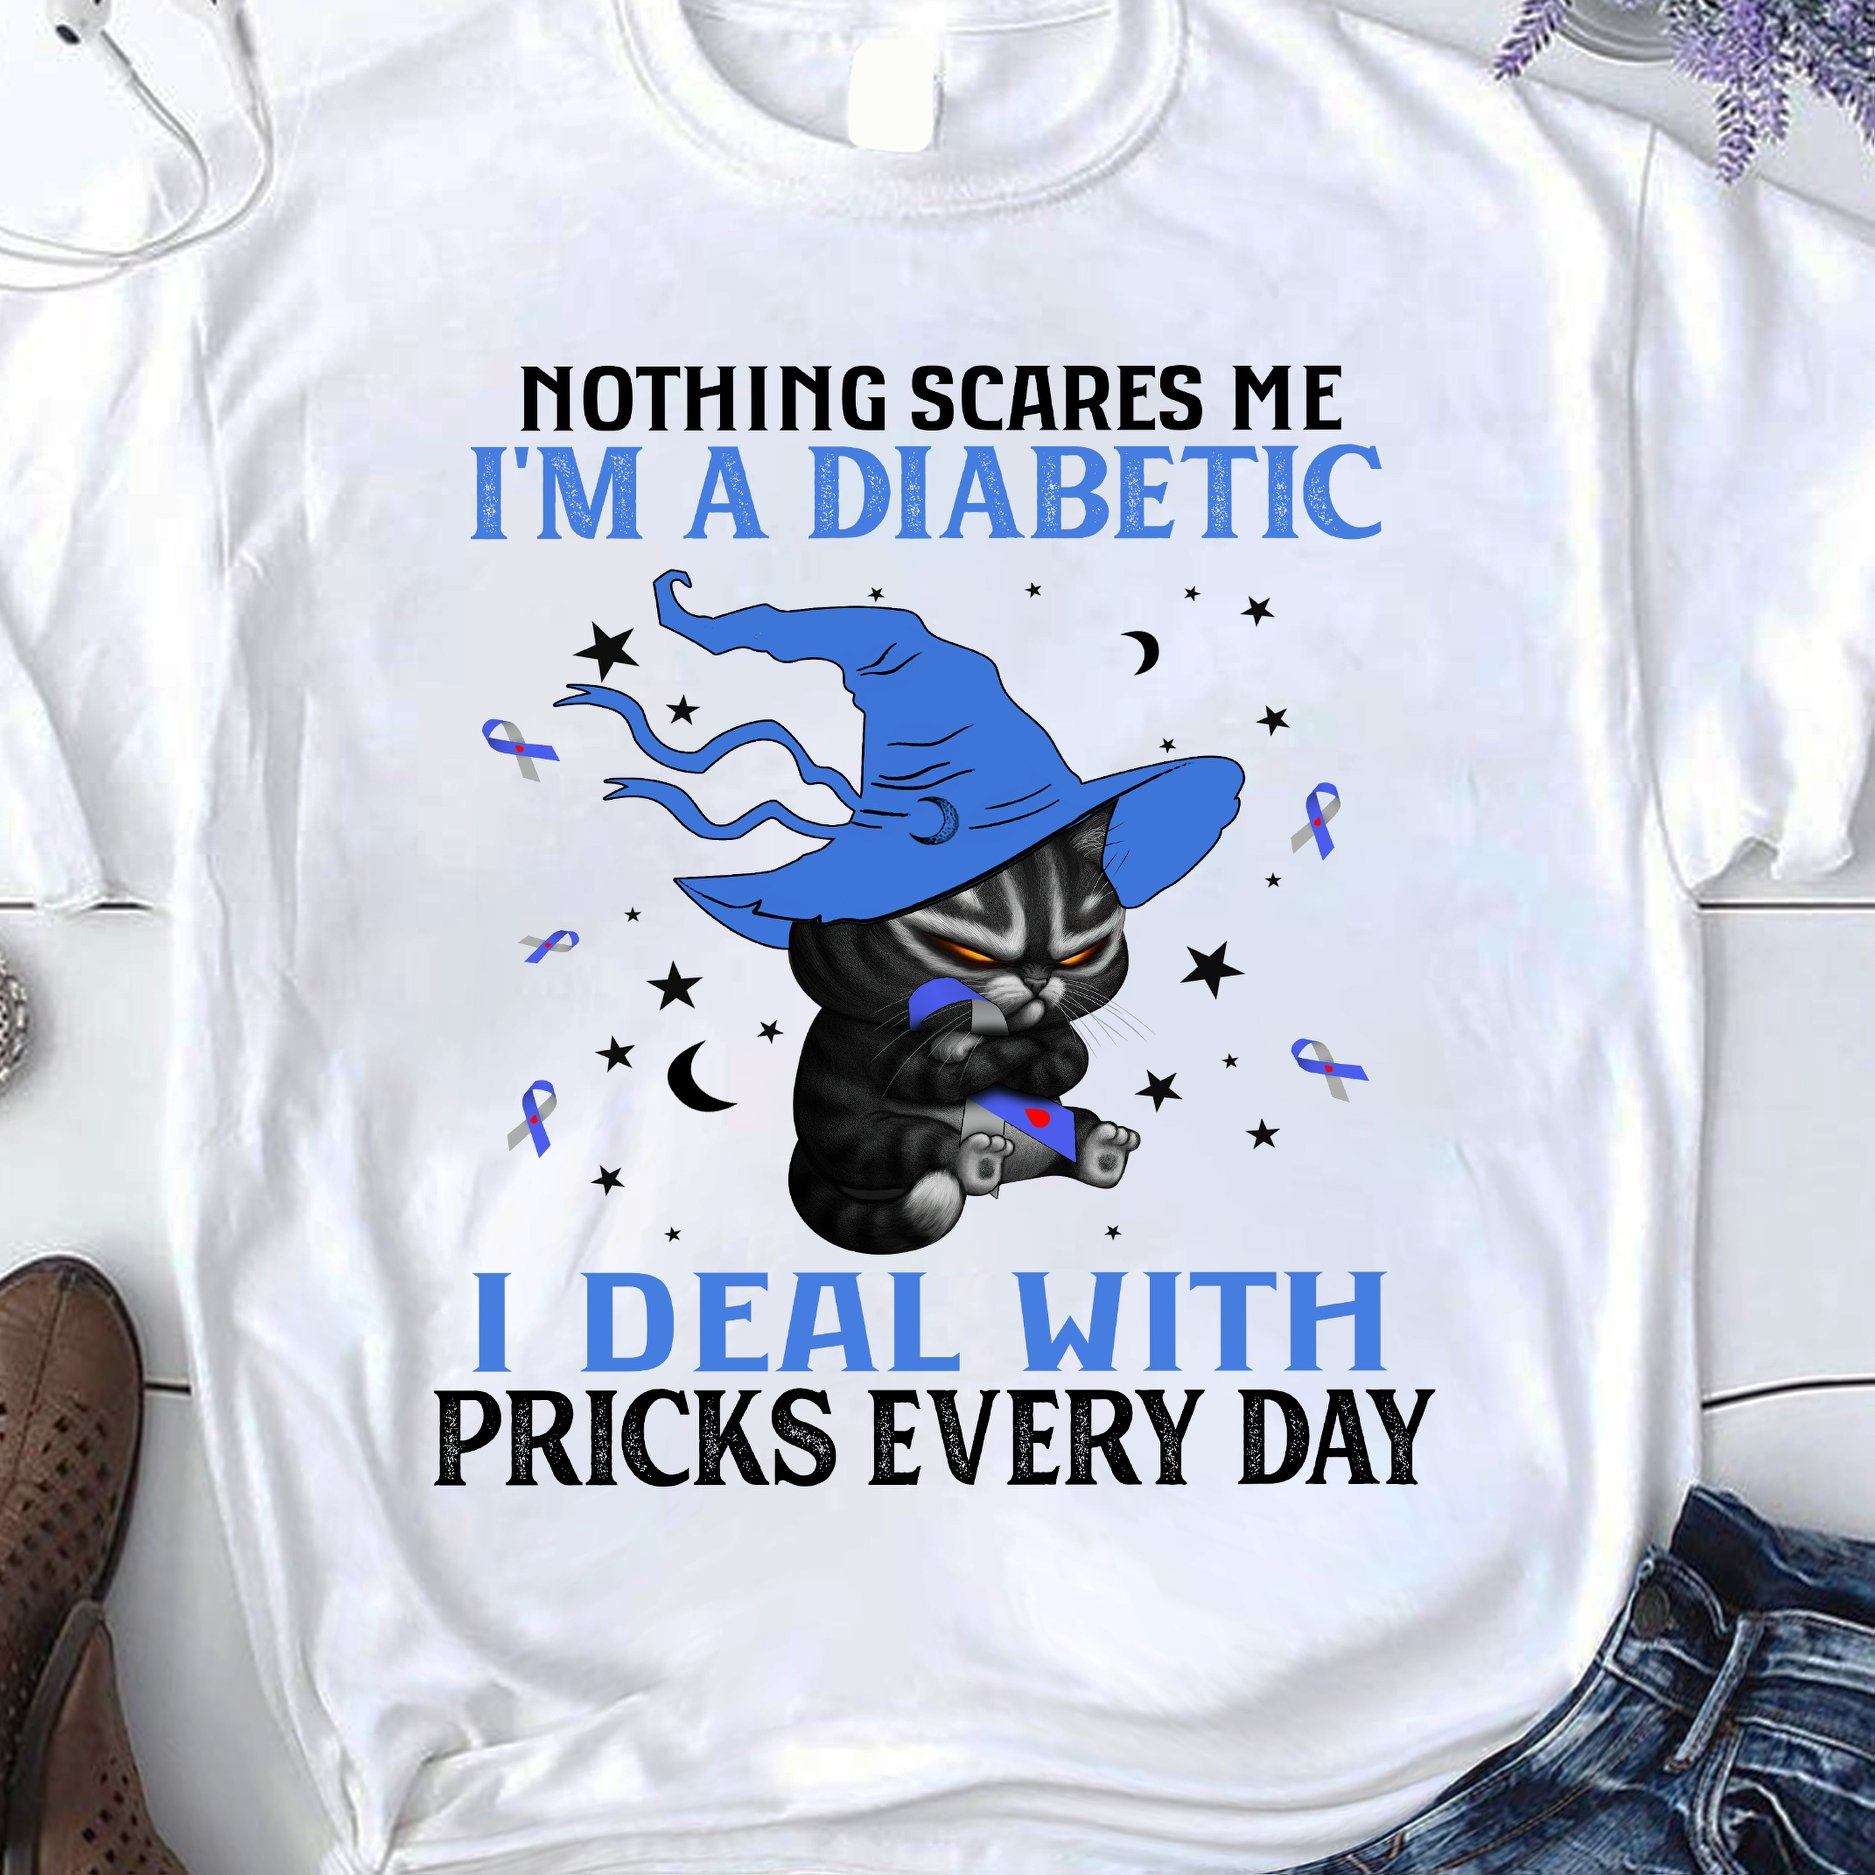 Nothing scares me I'm a diabetic I deal with pricks every day - Devil cat witch